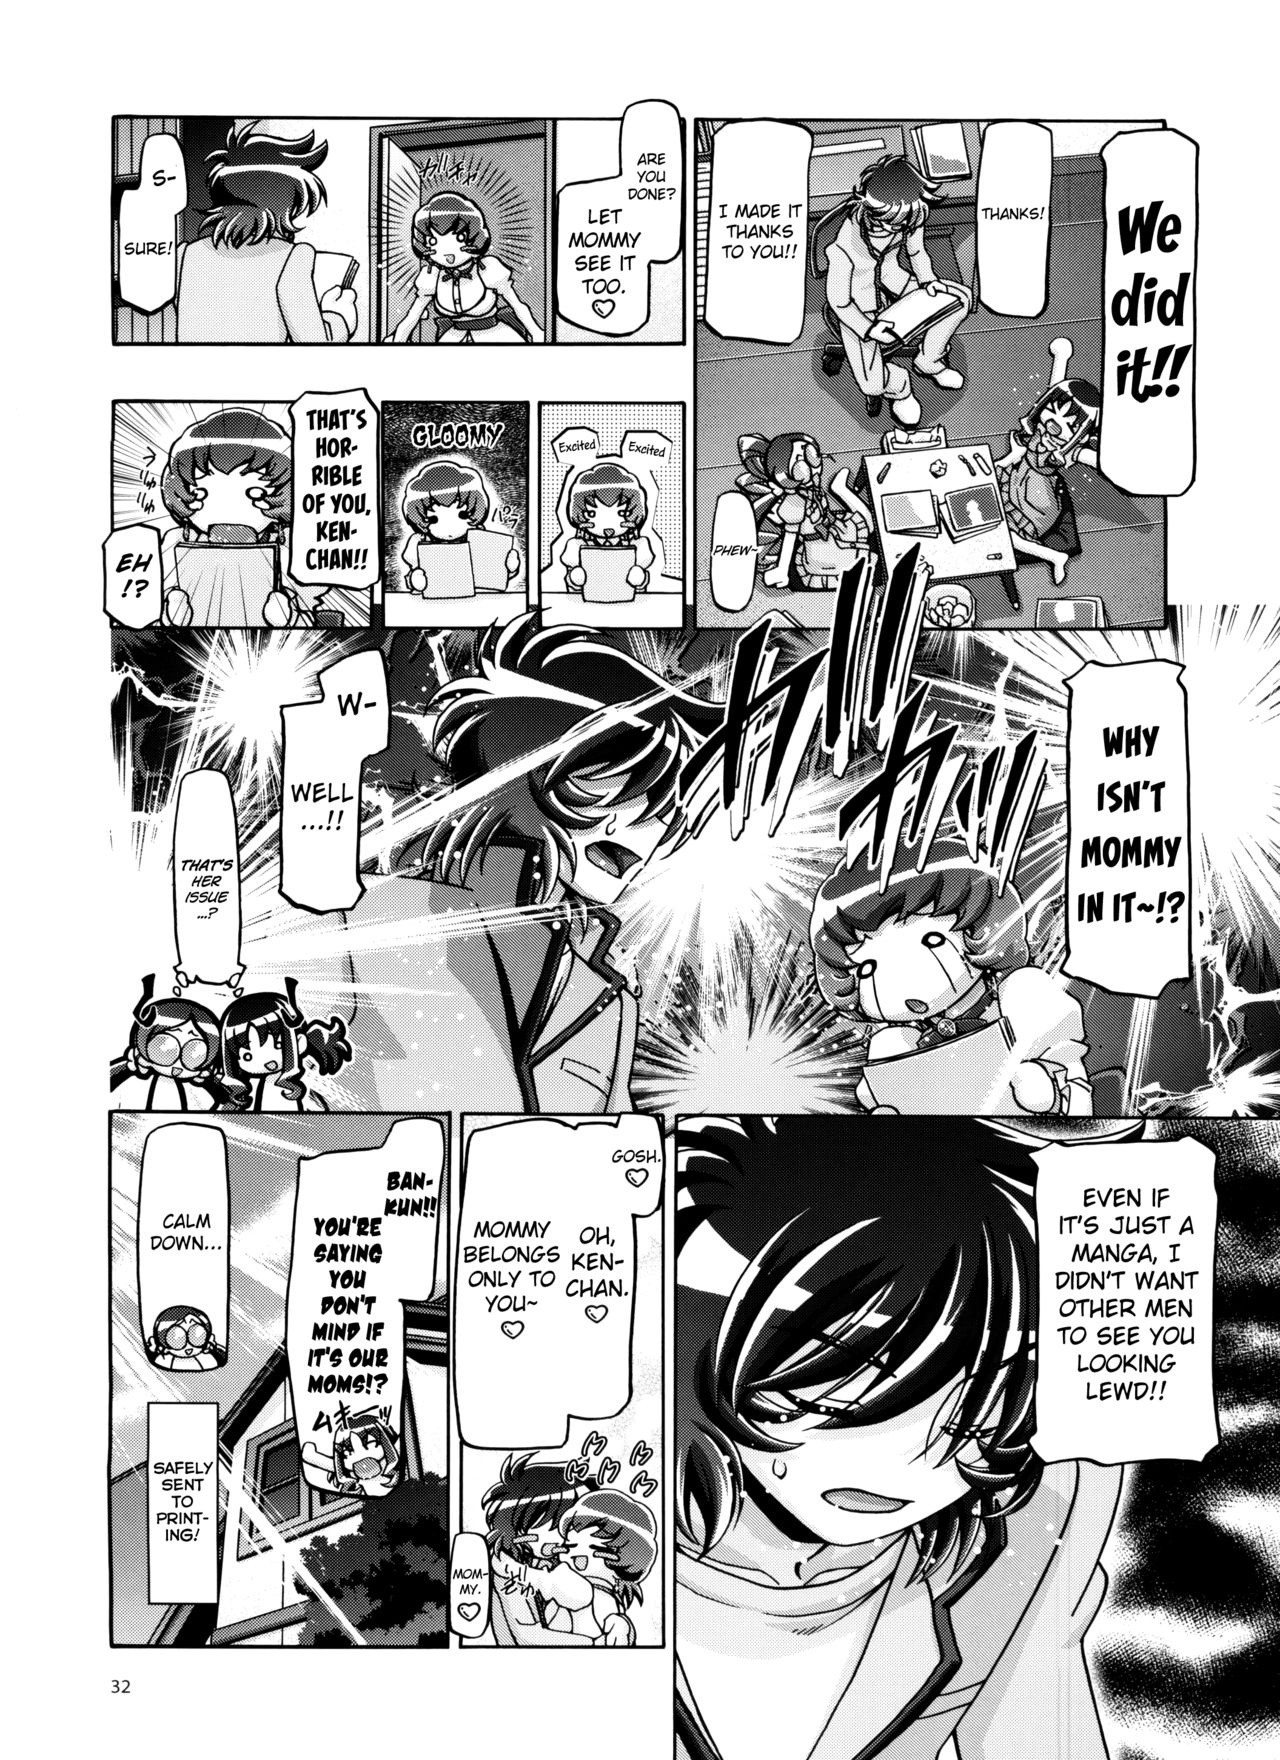 Heartcatch Mamacure hentai manga picture 33